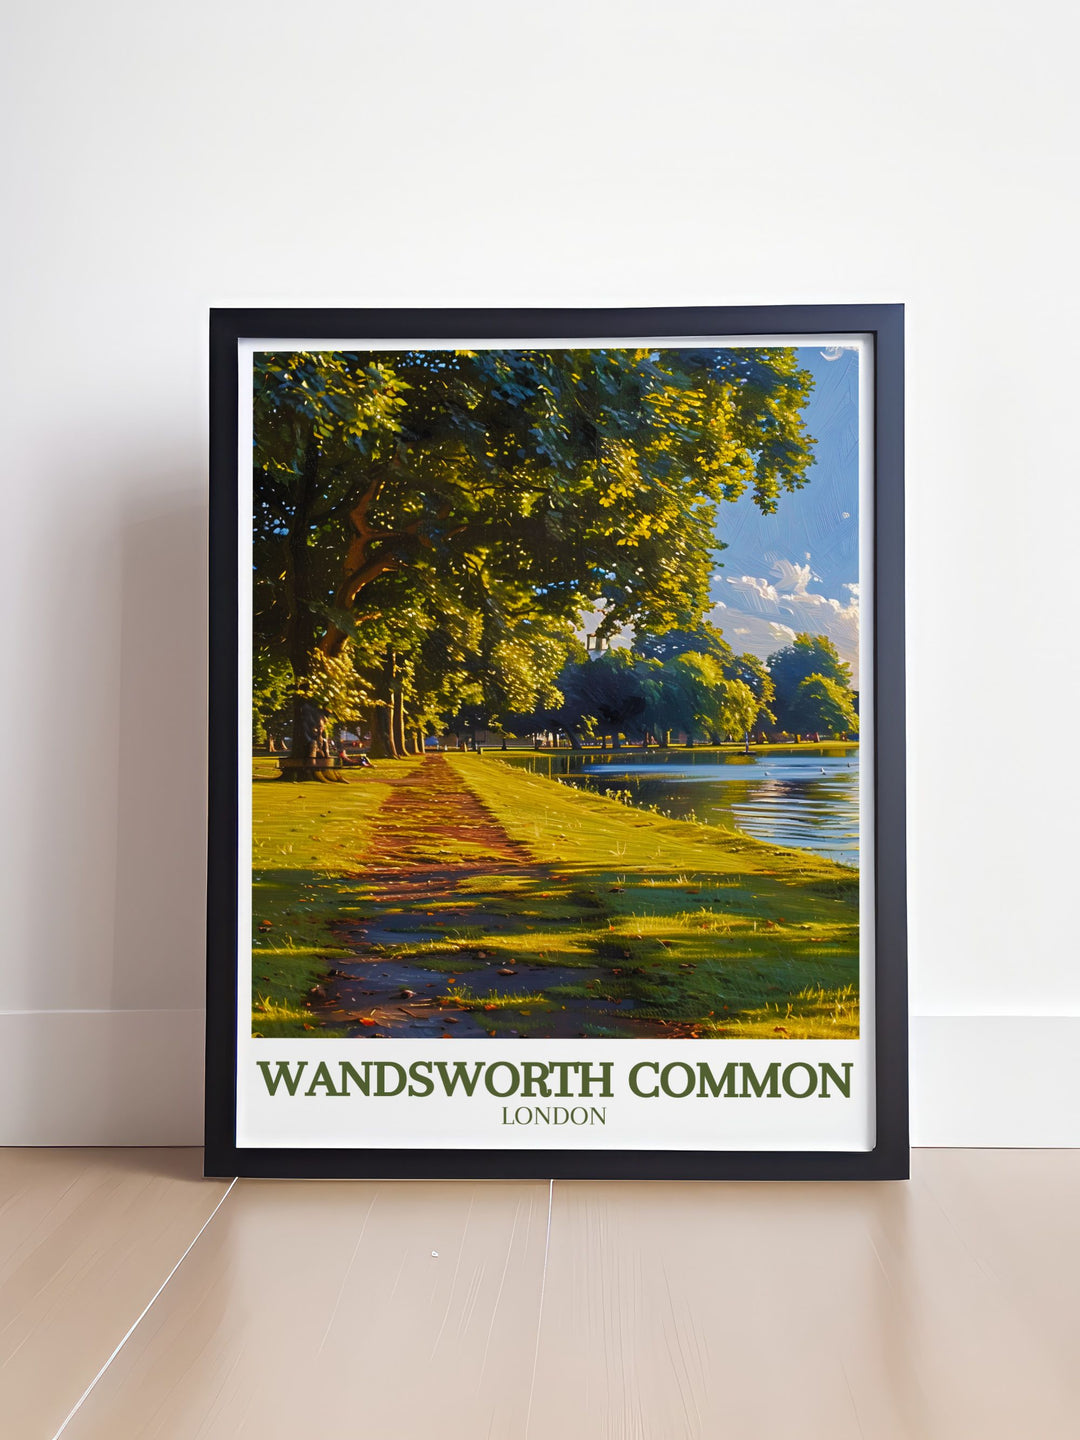 This Wandsworth Common poster is a must have for anyone who loves South London. The vintage print highlights the areas unique landmarks and natural beauty, making it a wonderful addition to your collection of London travel posters.